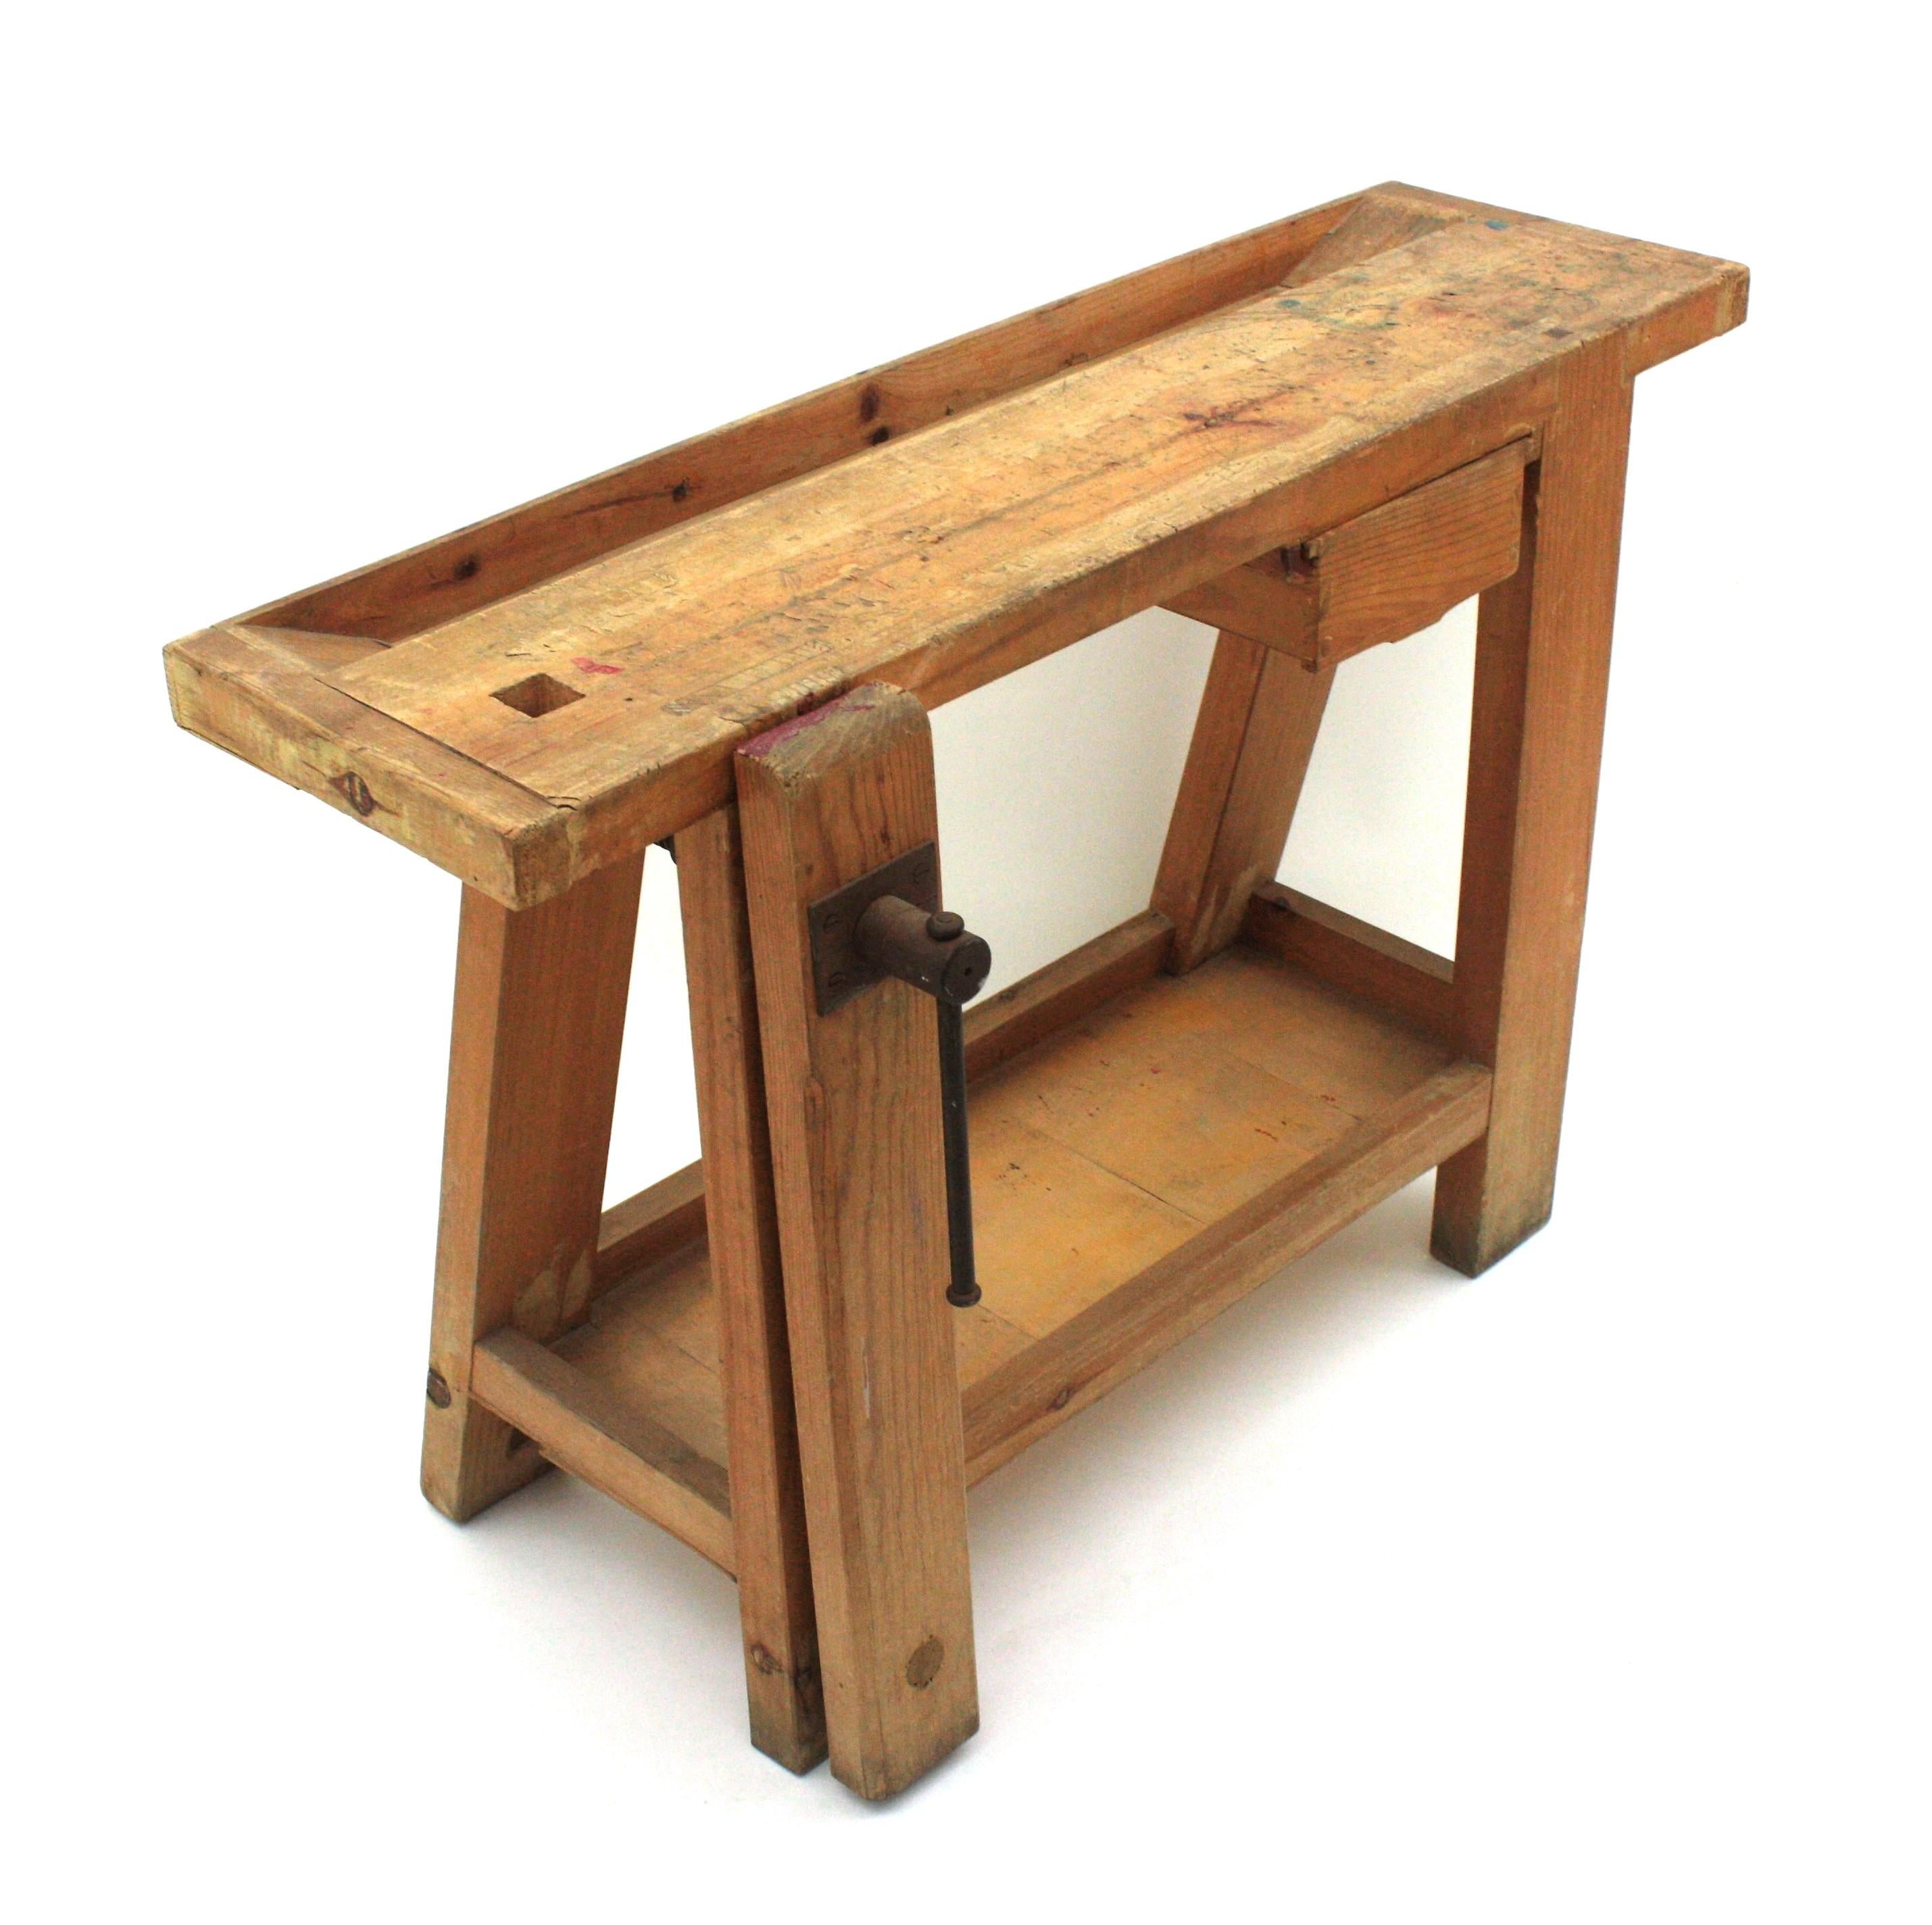 Child Workbench as Console Table, Spain, 1930s
Child size carpenter's workbench console. Brutalist wood work bench table with original hardware and fantastic patina.
Unusual size.
To be used as console table or sofa couch table in any industrial,